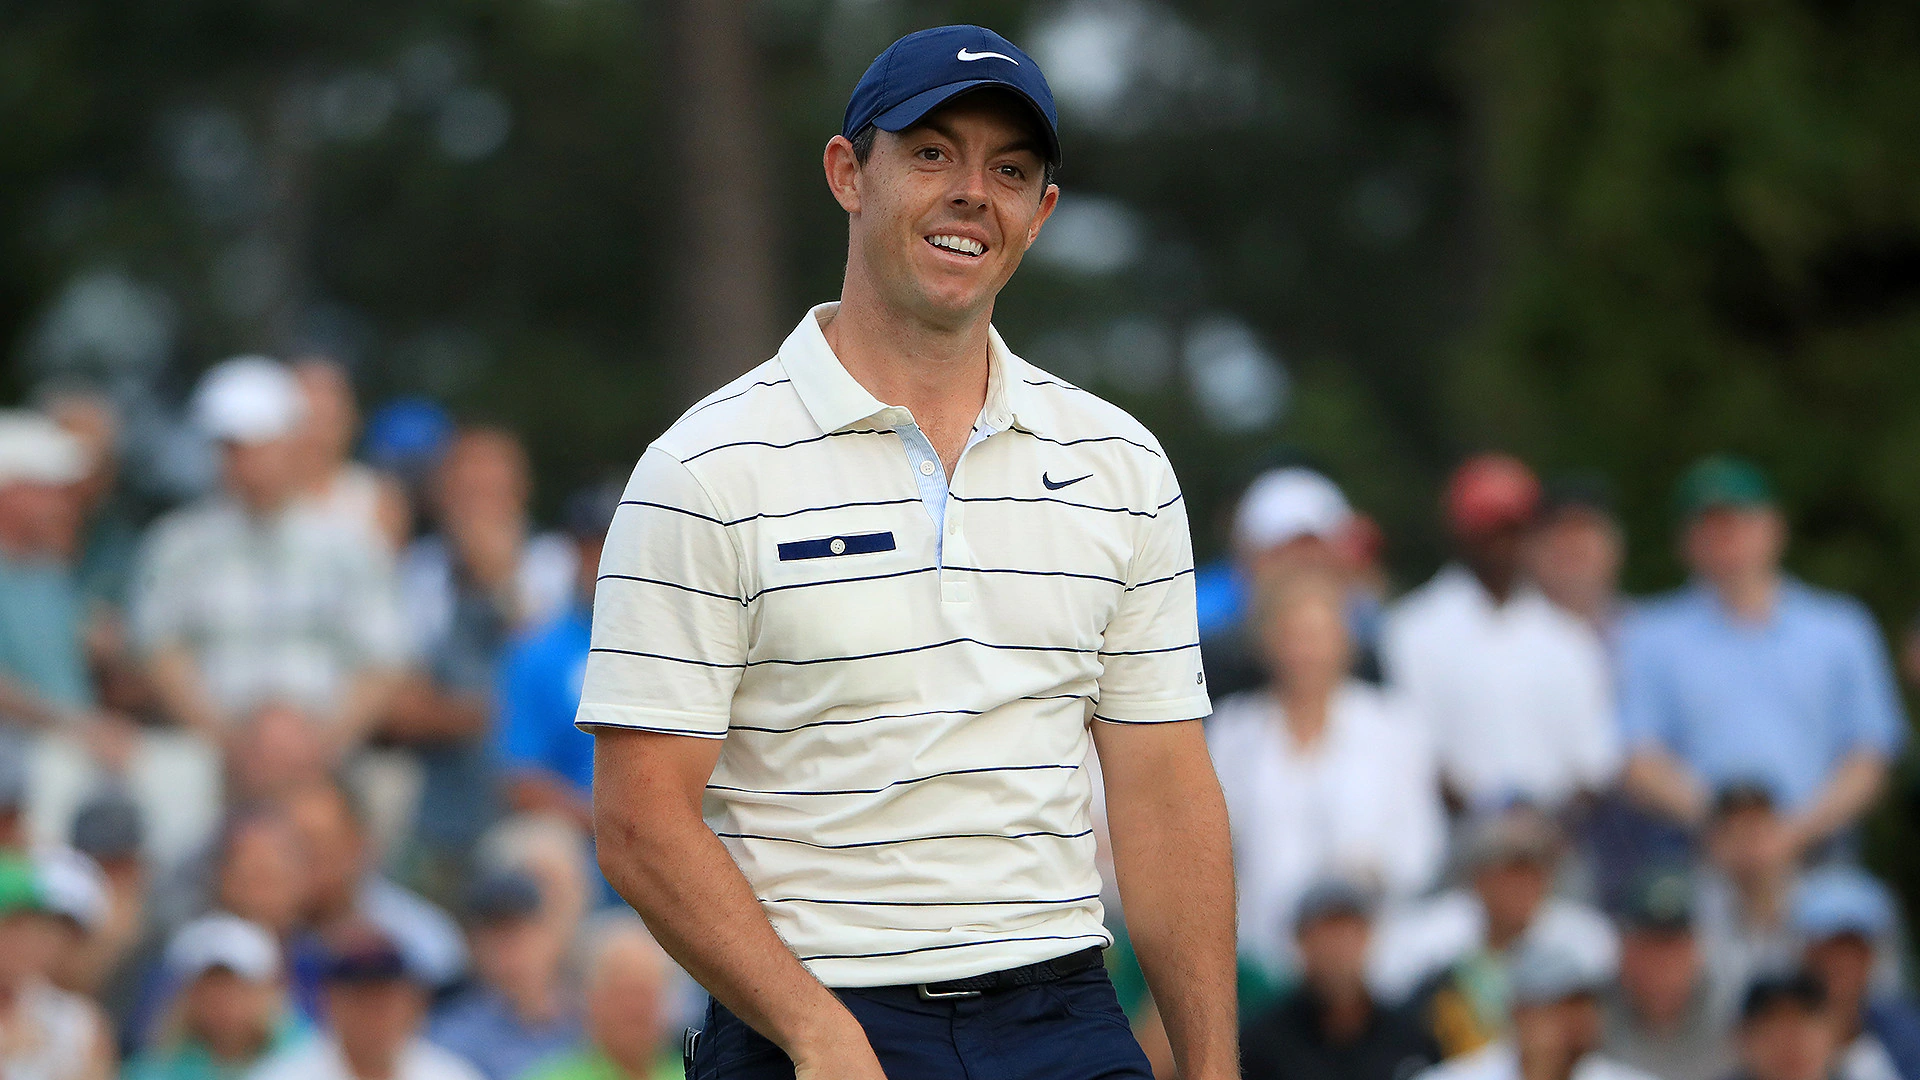 Rory McIlroy says this skill will be ‘trickier’ during fall Masters